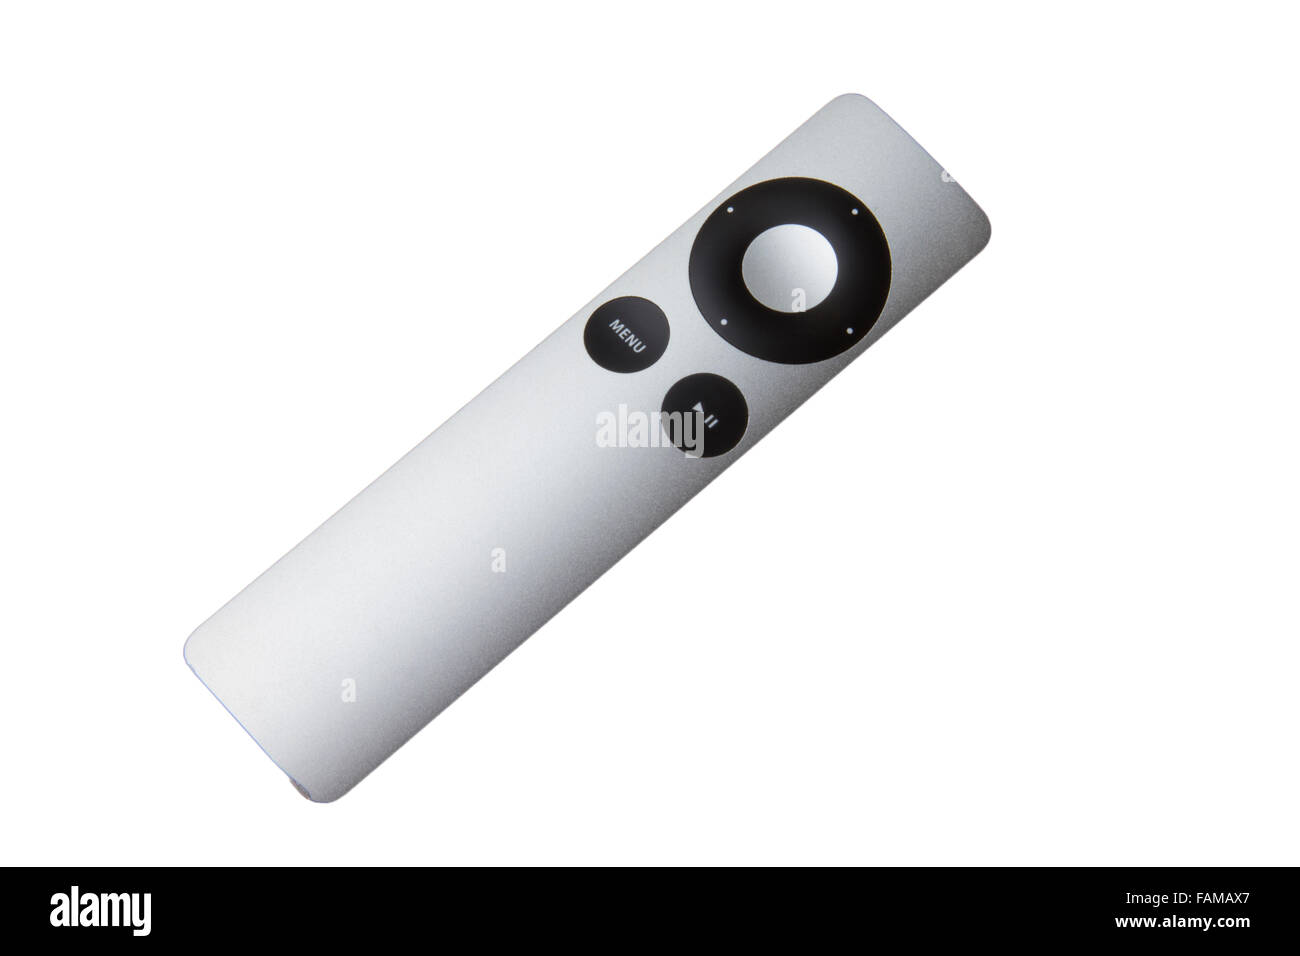 Apple TV remote controller on a white background Stock Photo